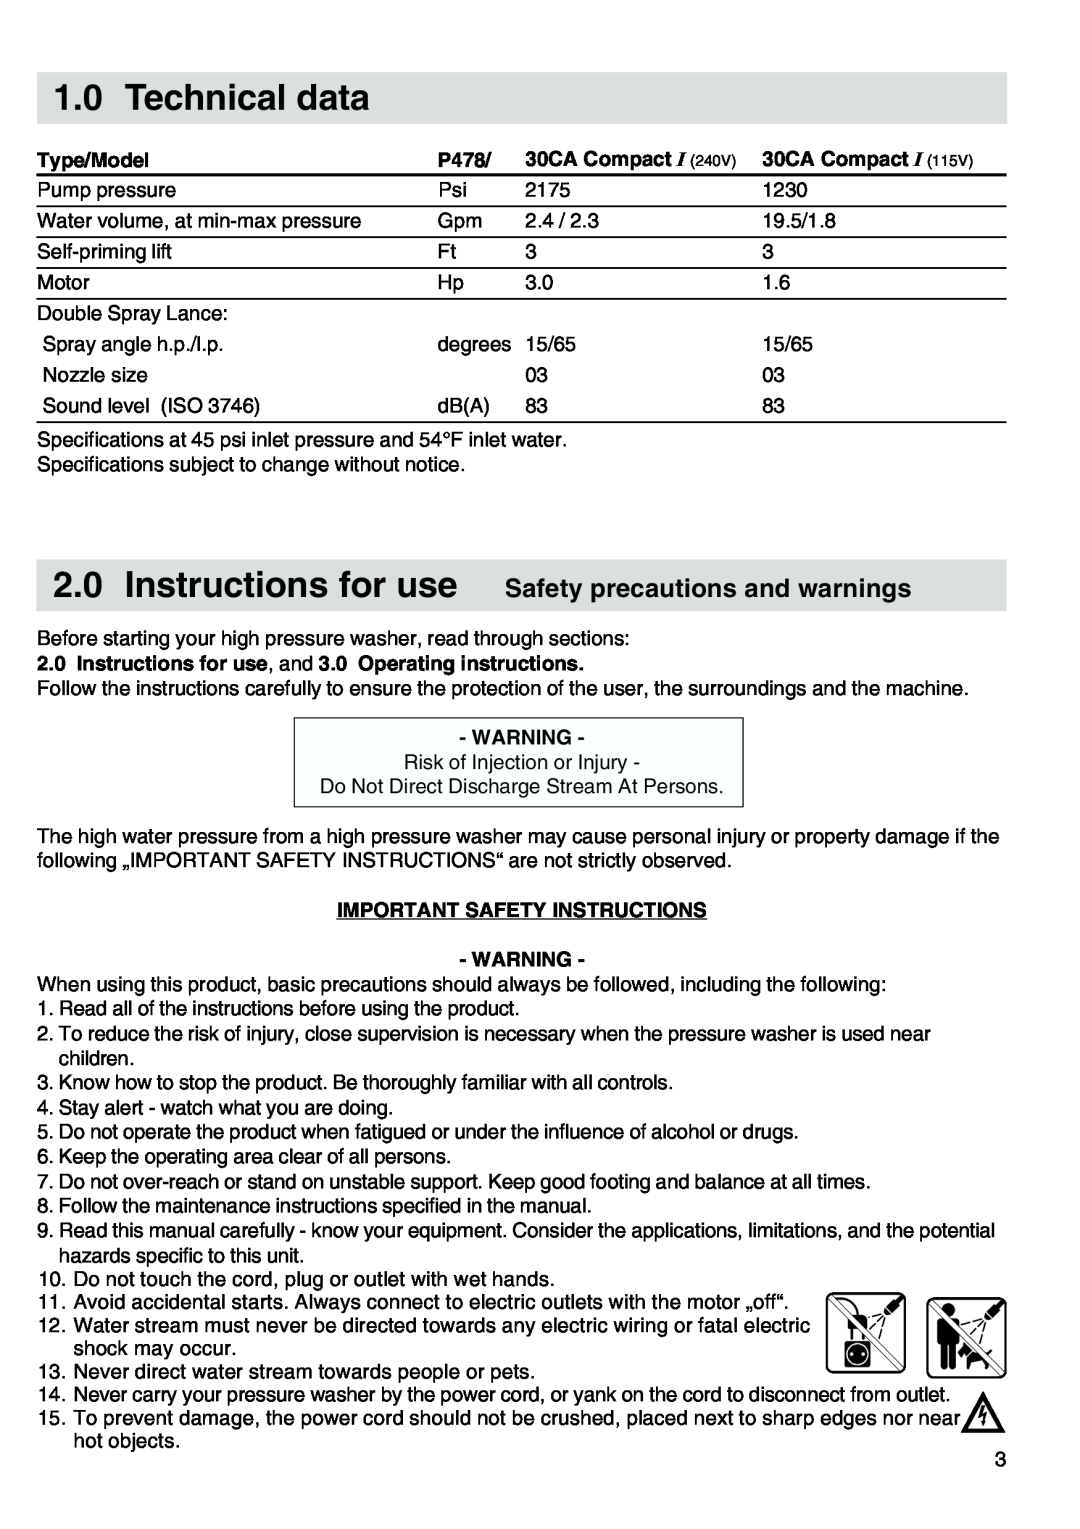 Nilfisk-ALTO 30CA COMPACT I Technical data, Instructions for use Safety precautions and warnings, Type/Model, P478 